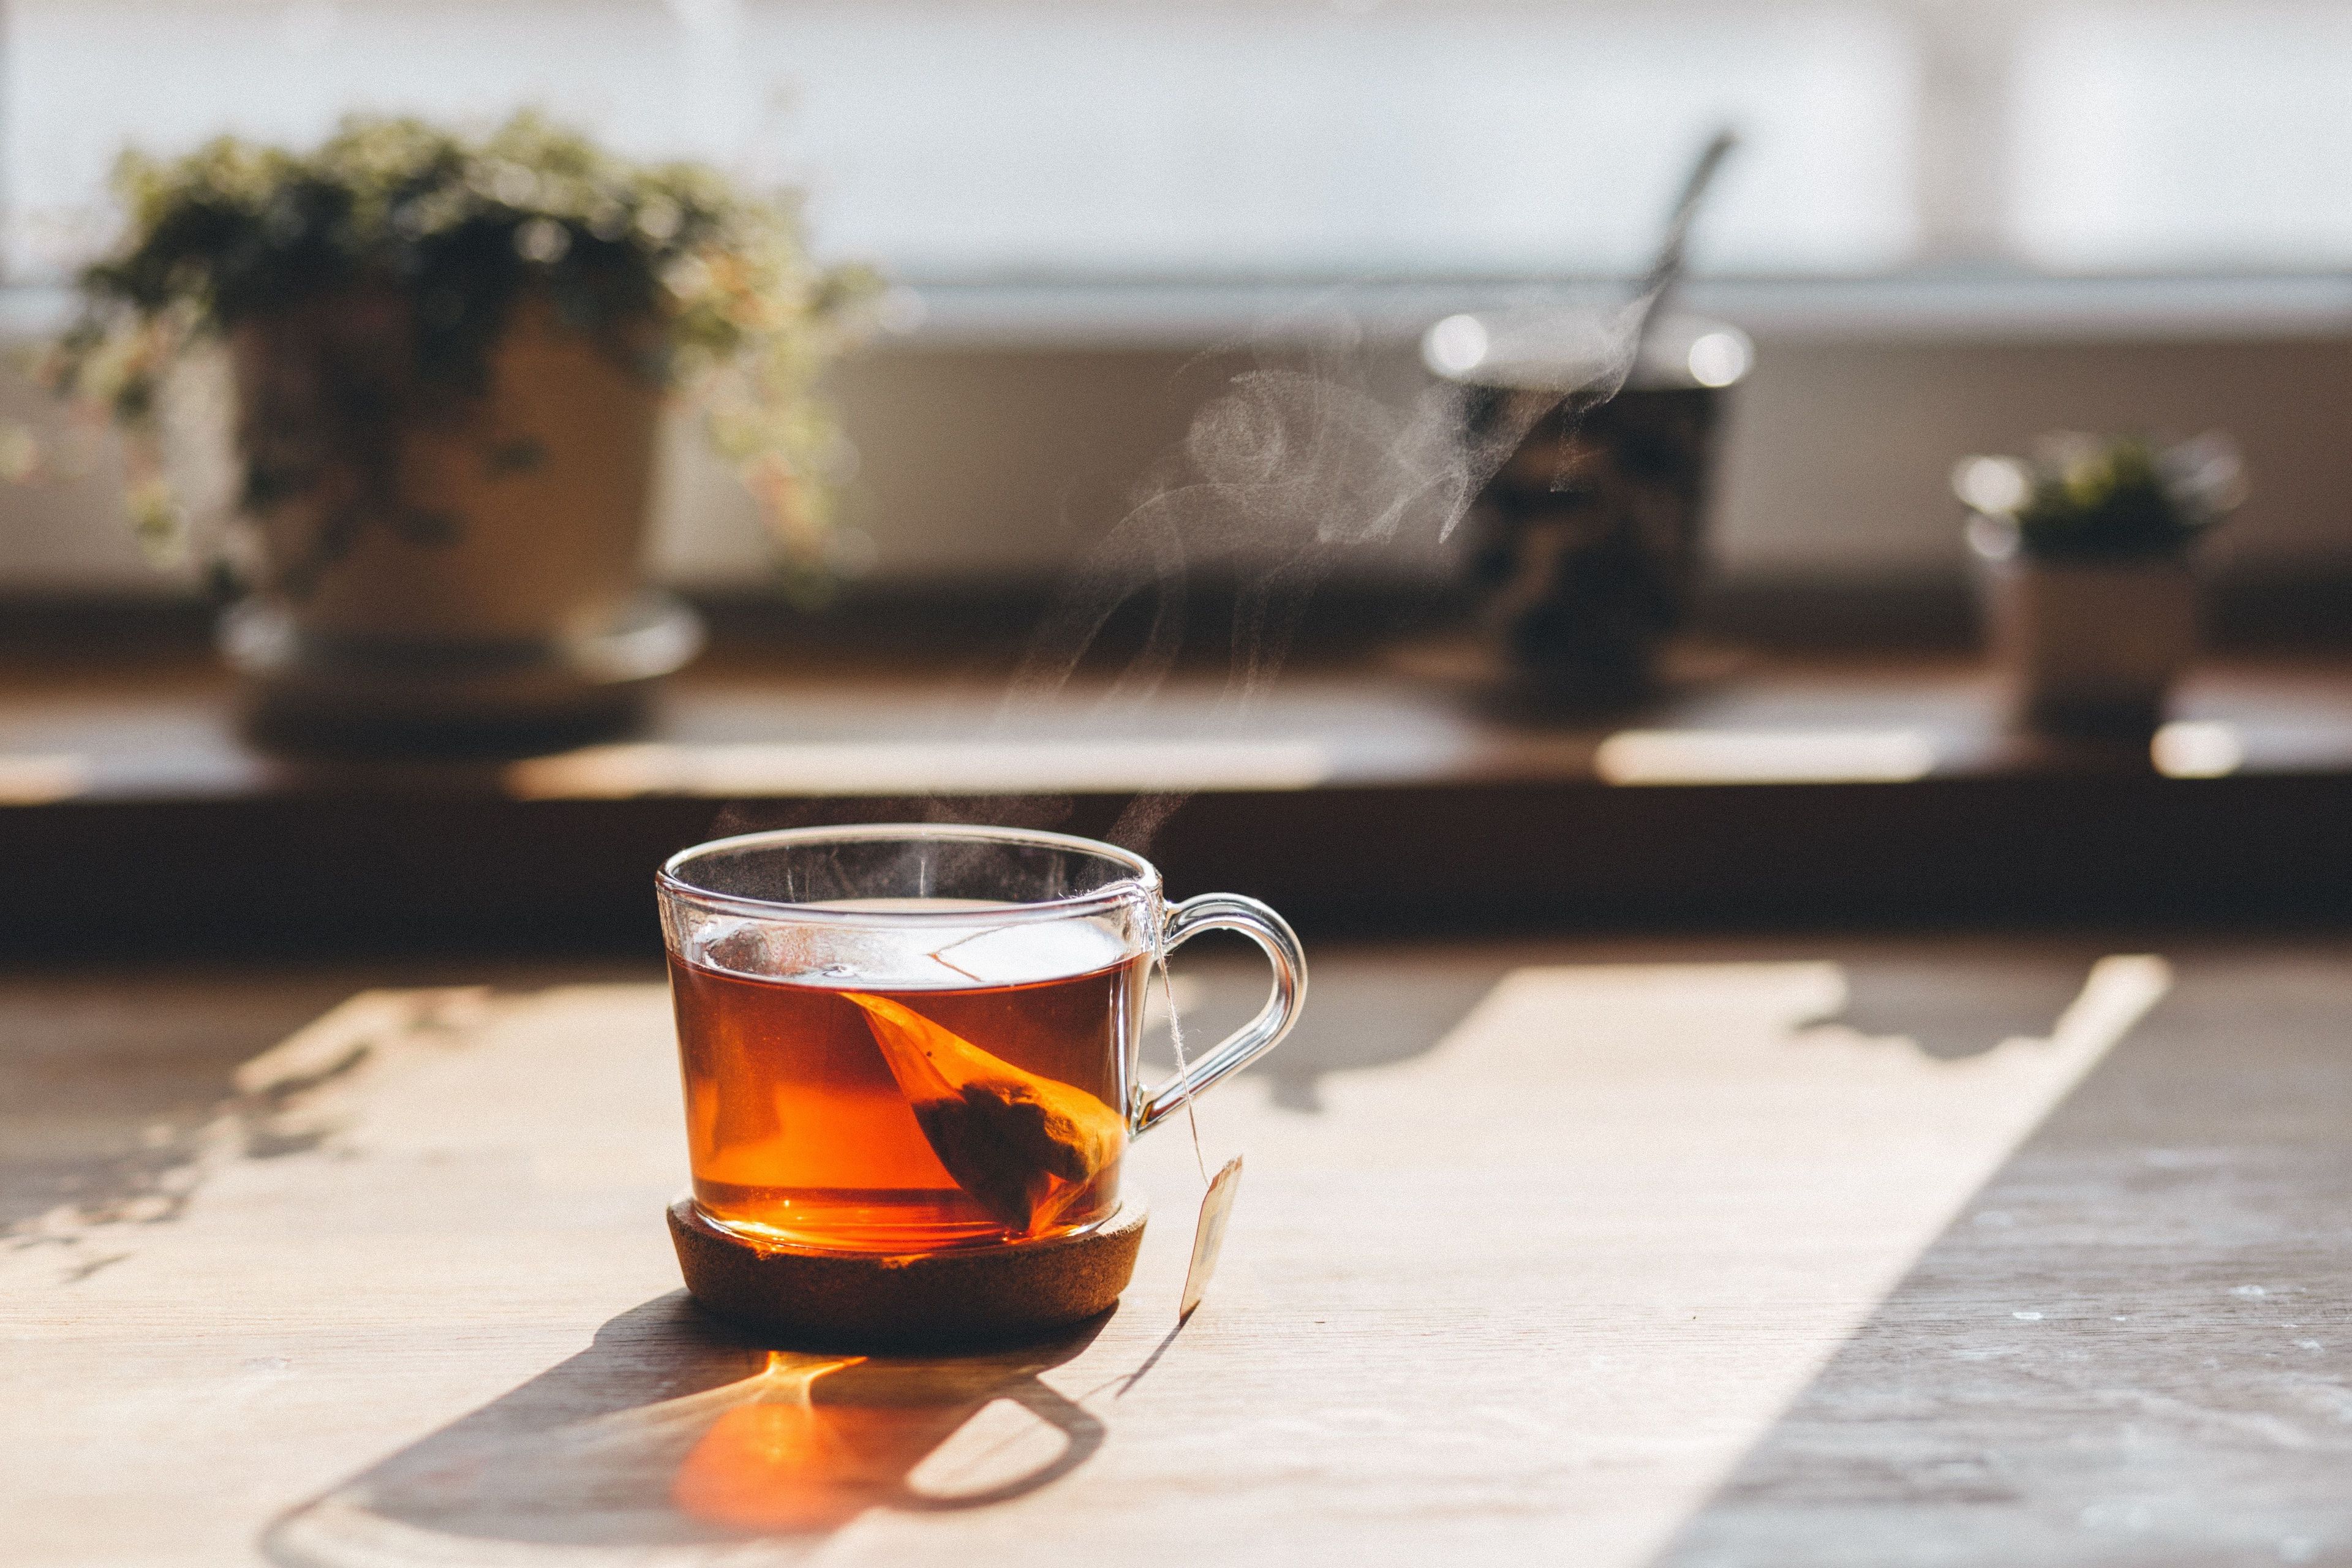 A steaming glass of herbal tea in front of window